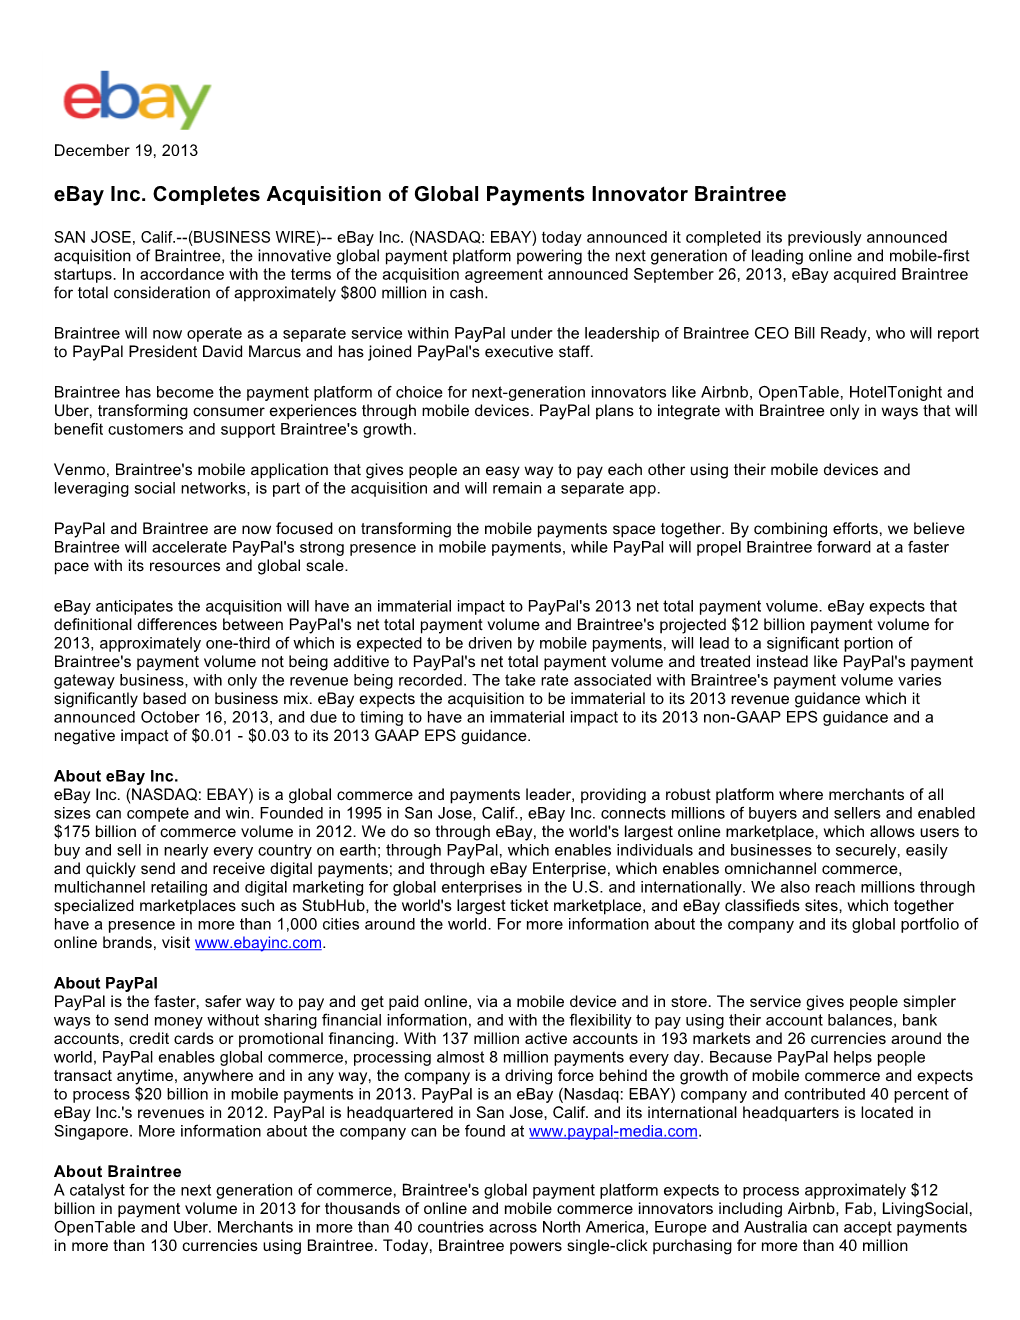 Ebay Inc. Completes Acquisition of Global Payments Innovator Braintree